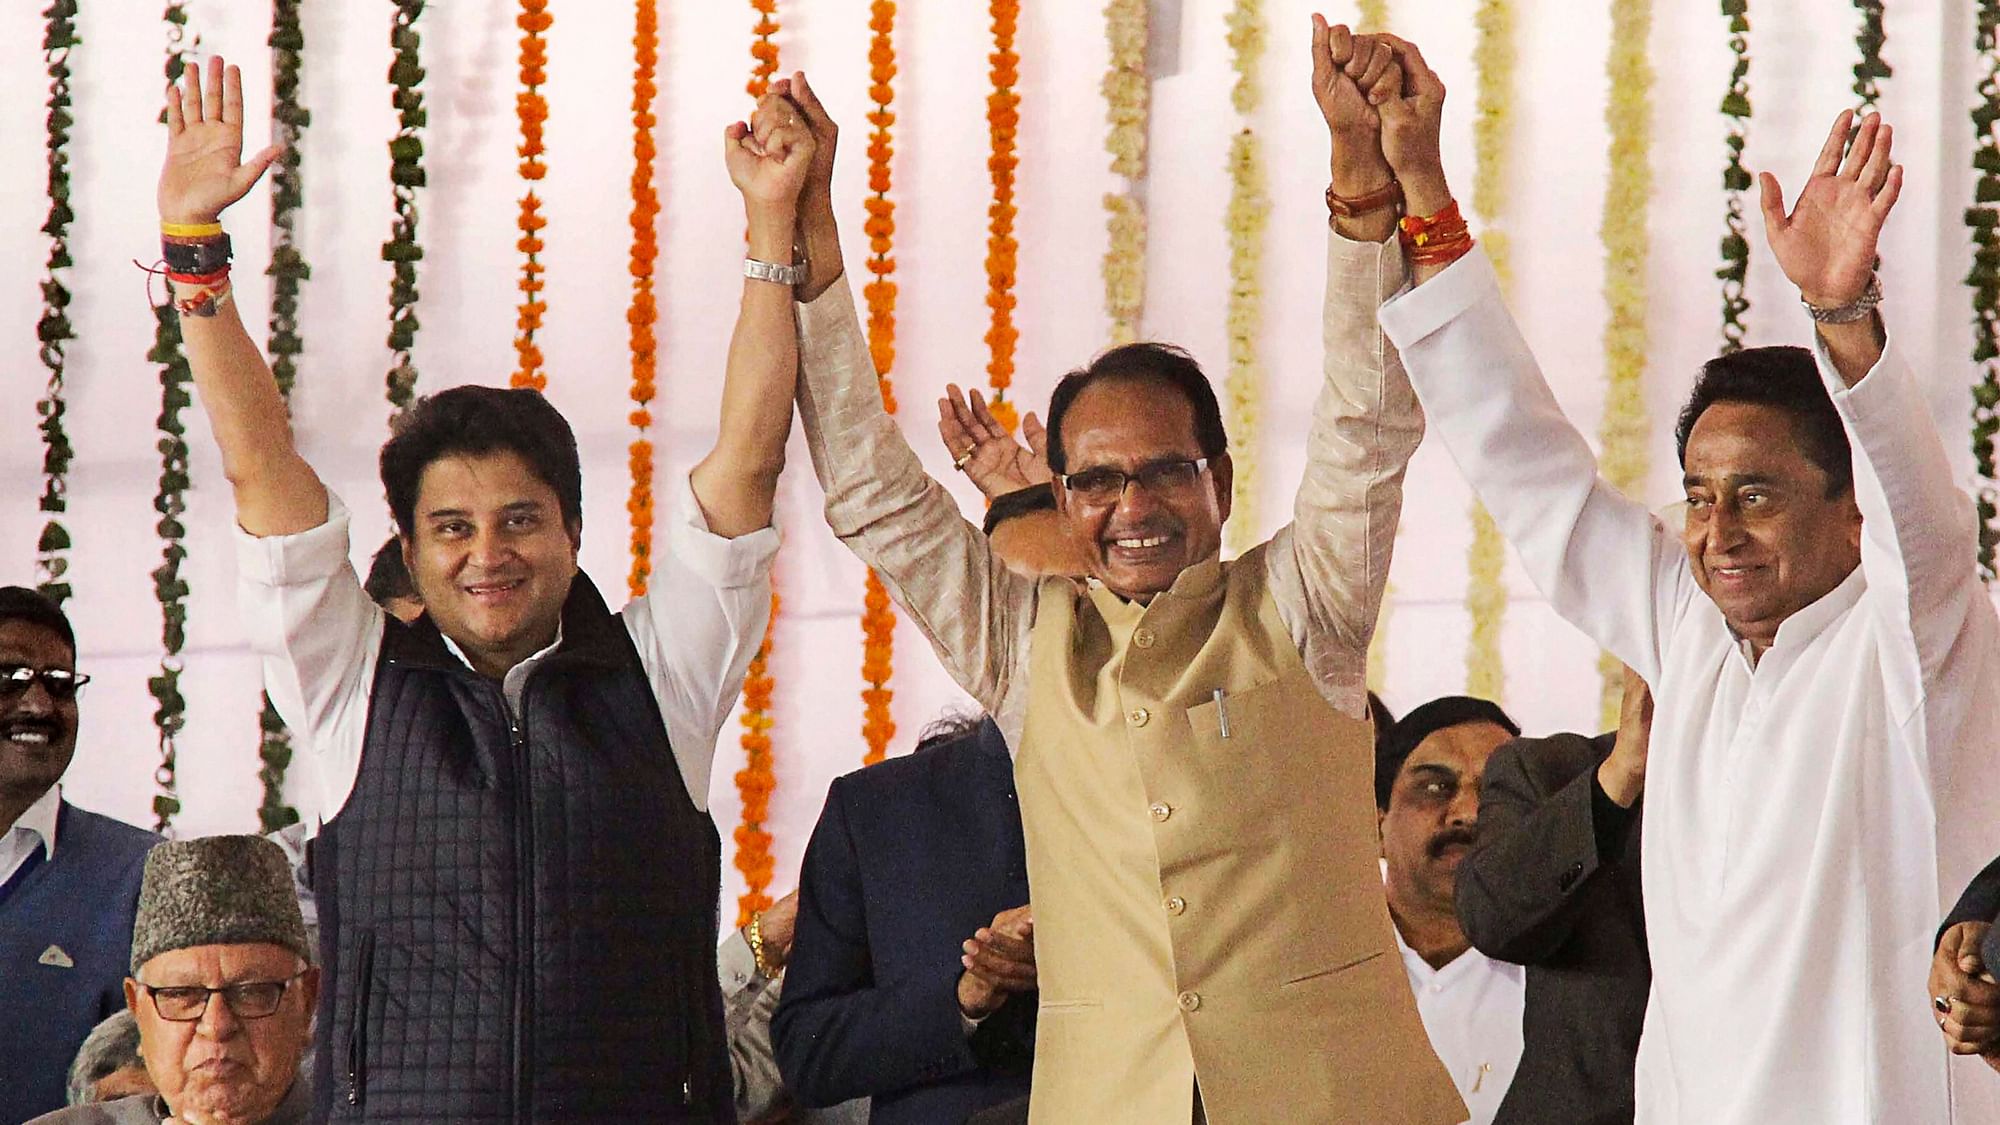  Newly sworn-in Madhya Pradesh Chief Minister Kamal Nath (R) with former chief minister Shivraj Singh Chouhan and Congress MP Jyotiraditya Scindia (L), during Nath’s swearing-in-ceremony, in Bhopal on 17 December 2018.&nbsp;